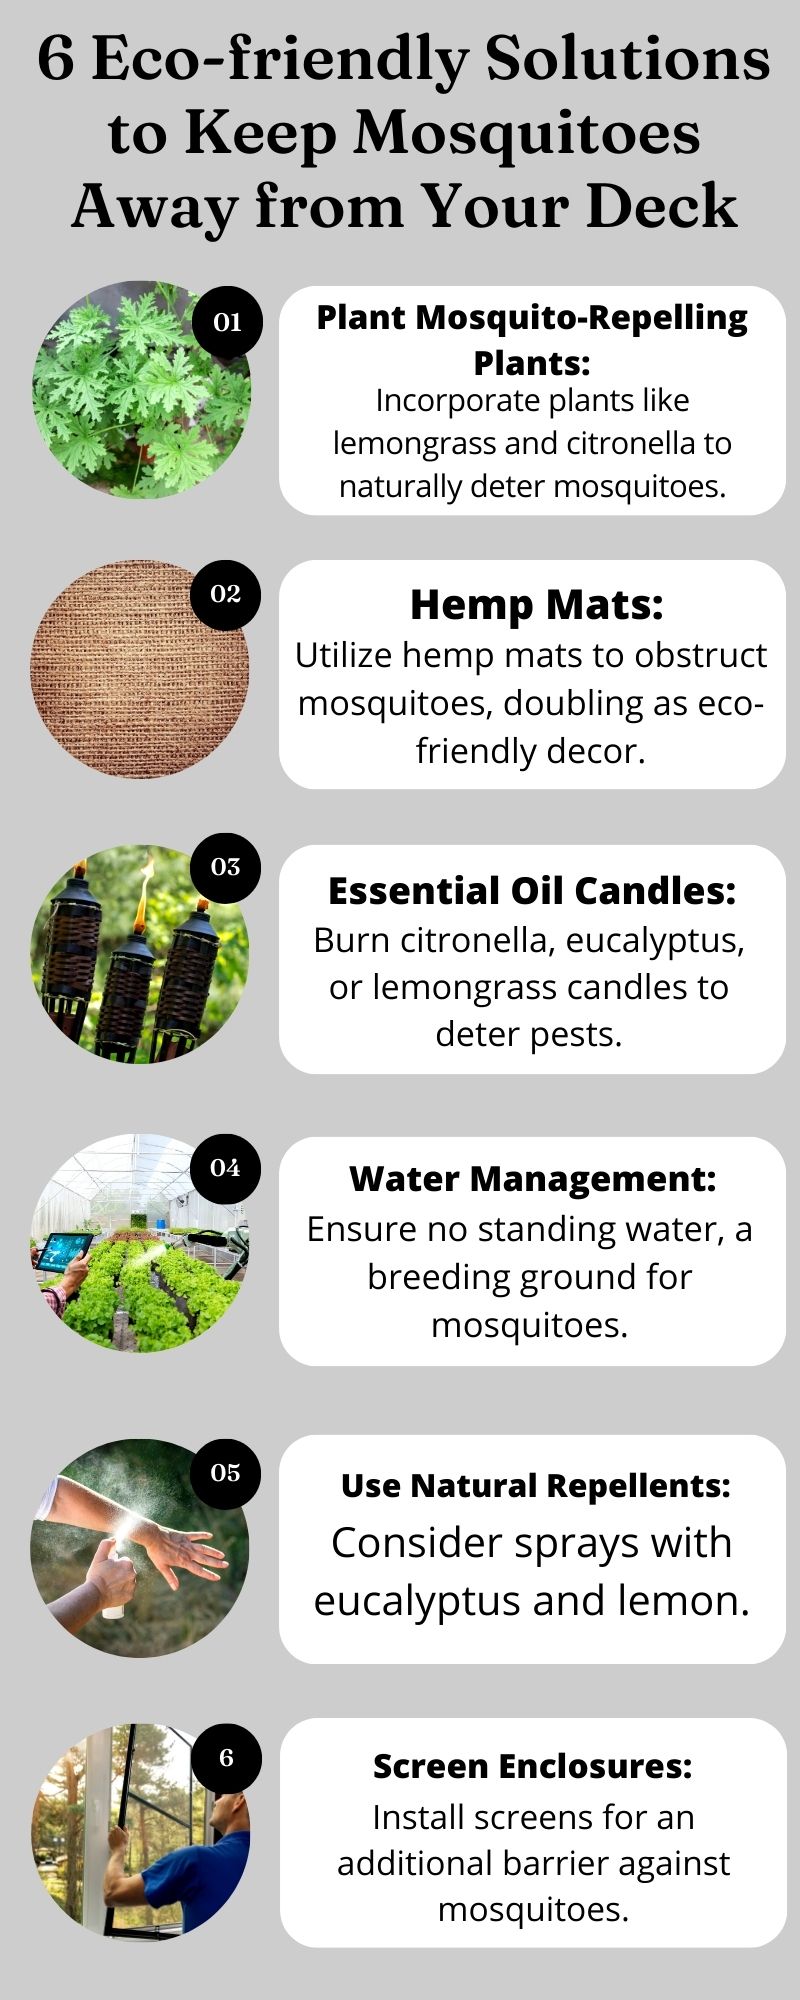 6 Eco-friendly Solutions to Keep Mosquitoes Away from Your Deck